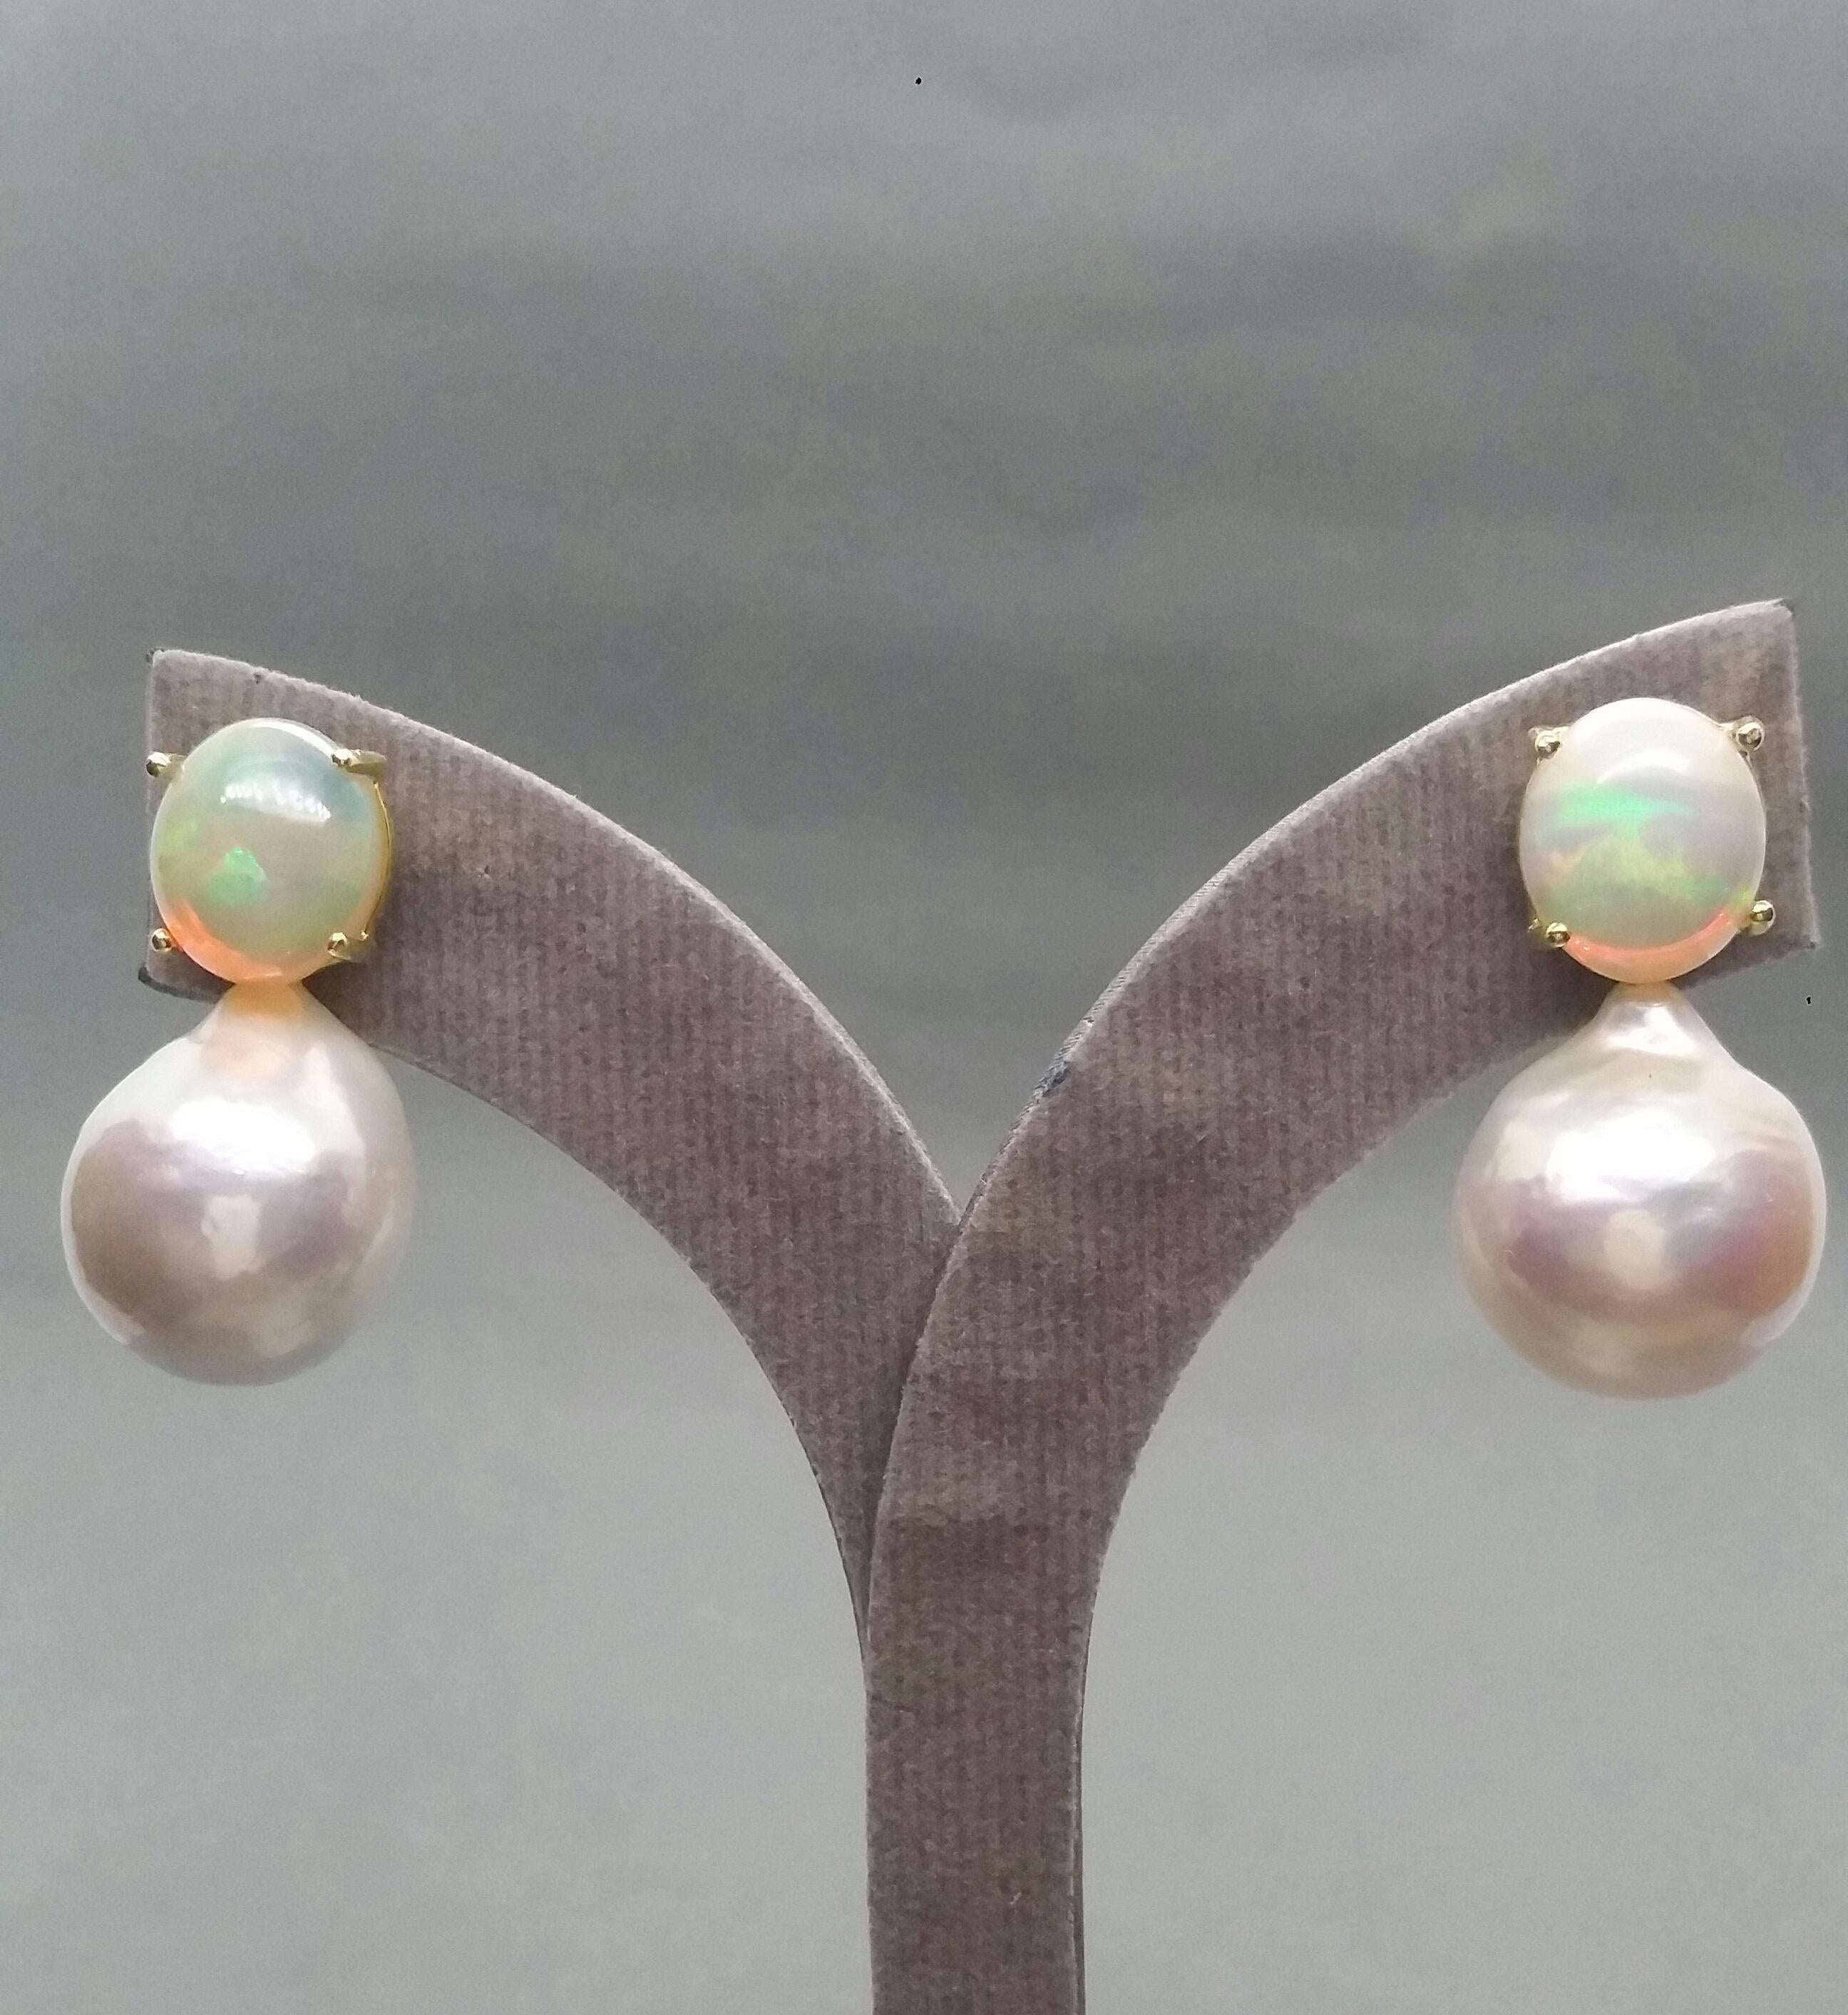 Big Size White Baroque Pearls Oval Solid Opal Cabochons Yellow Gold Earrings 1